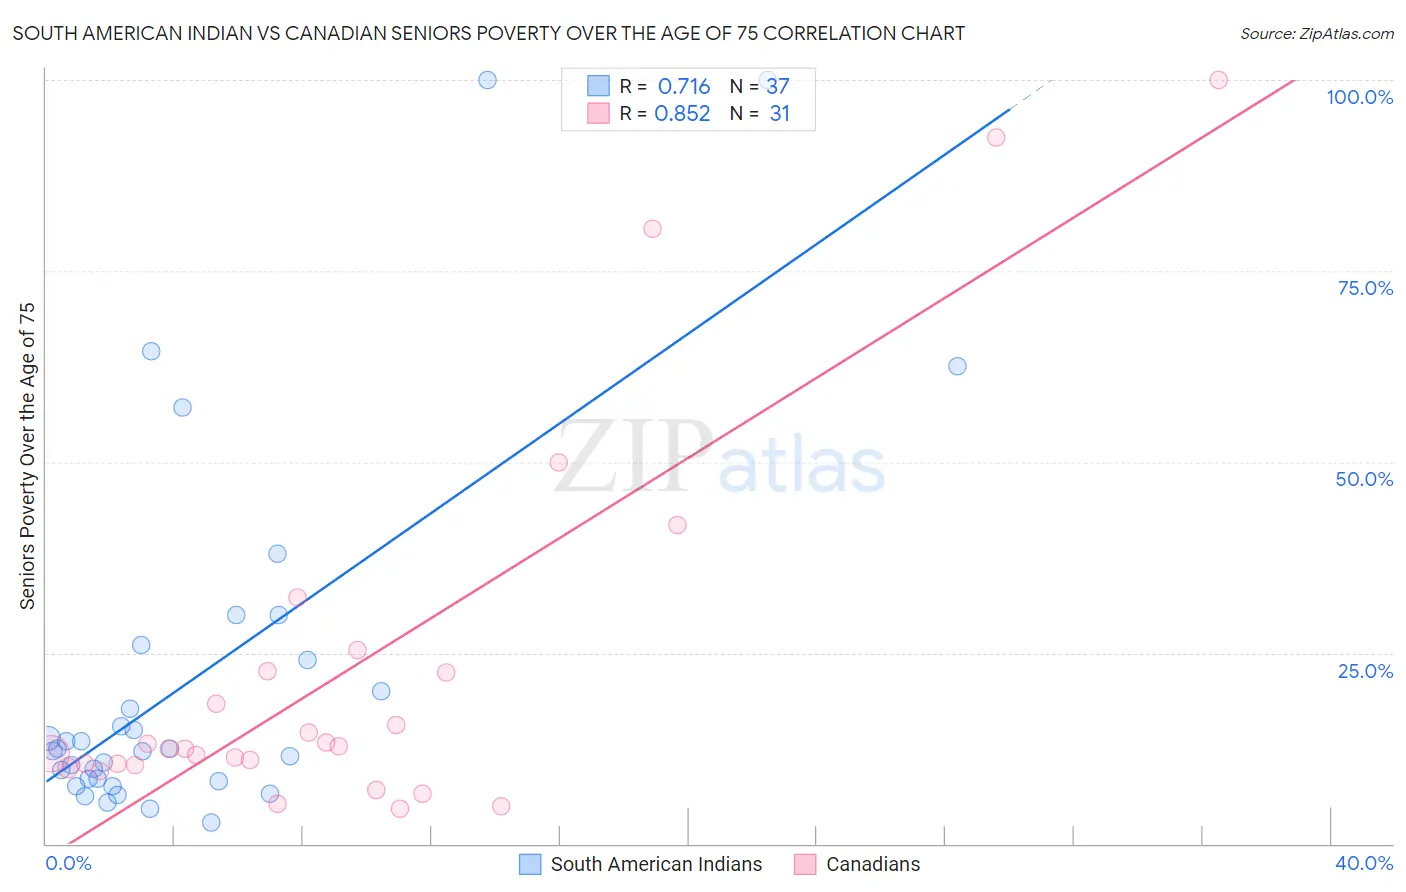 South American Indian vs Canadian Seniors Poverty Over the Age of 75